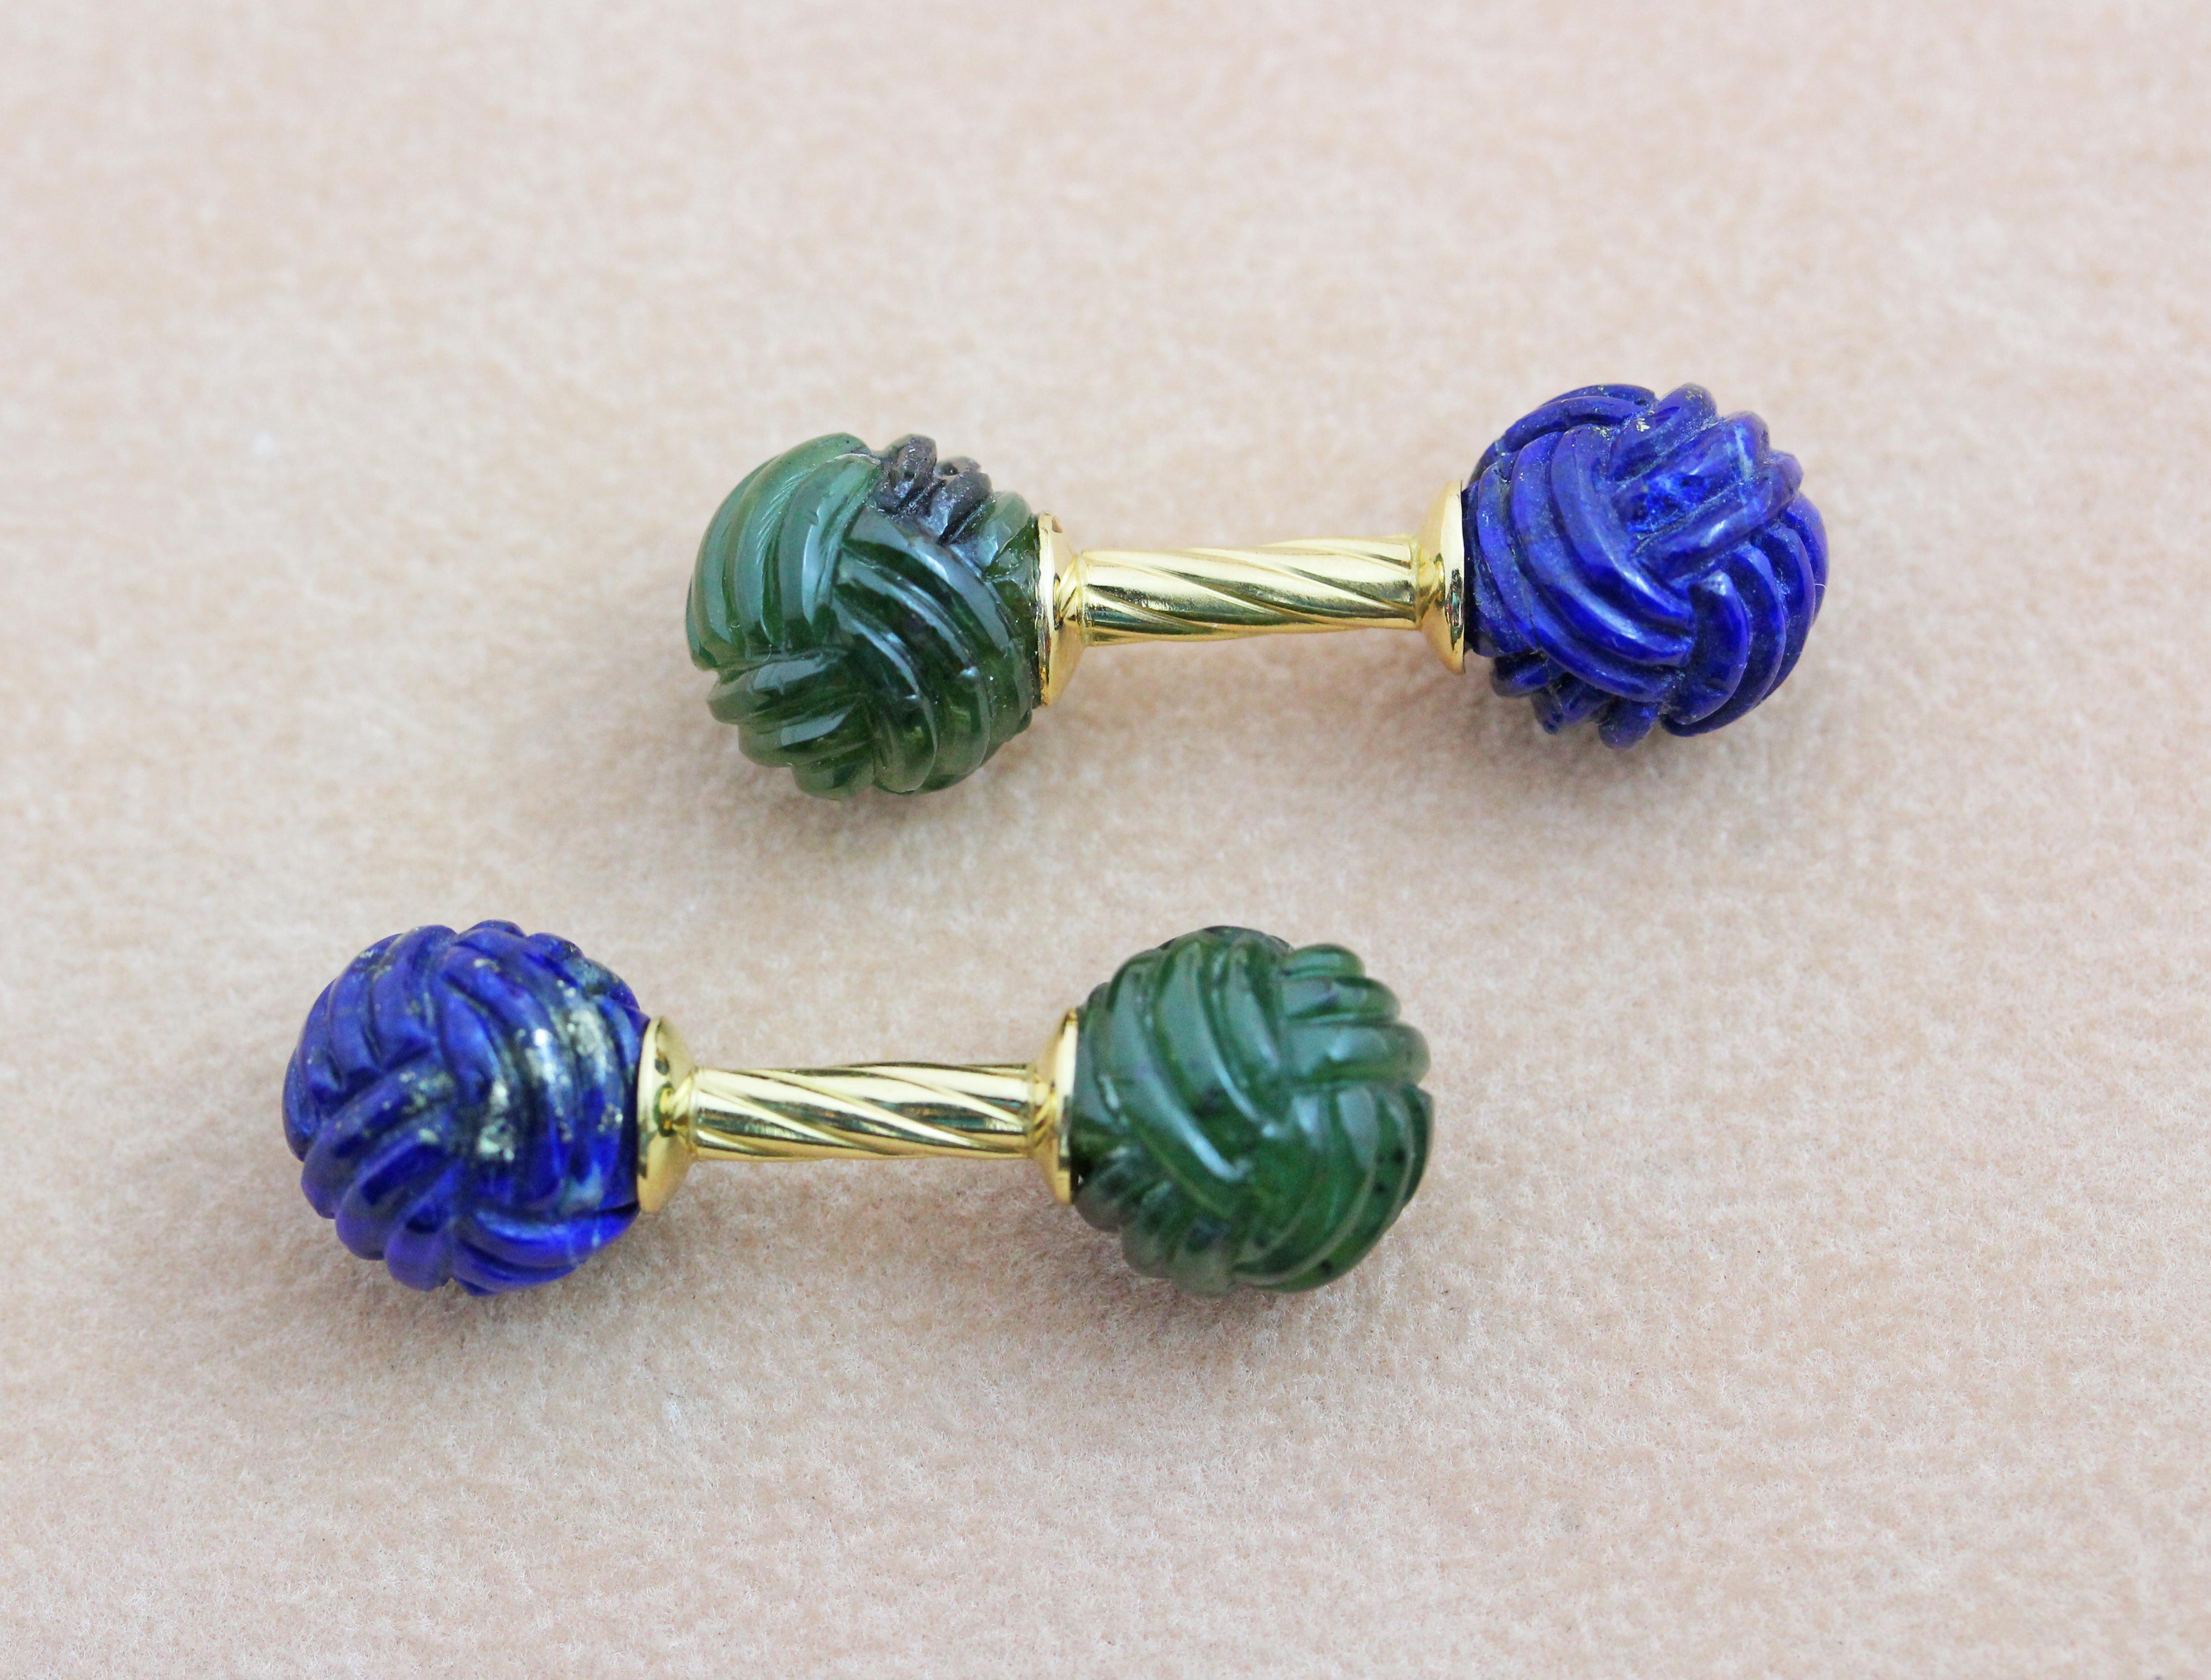 Simple and timeless, these cufflinks are a classic addition to any attire. Their front face and toggle are identical and are hand carved in a spherical shape out of lapis lazuli and jade, whose dark blue shade strikingly complements the green of the